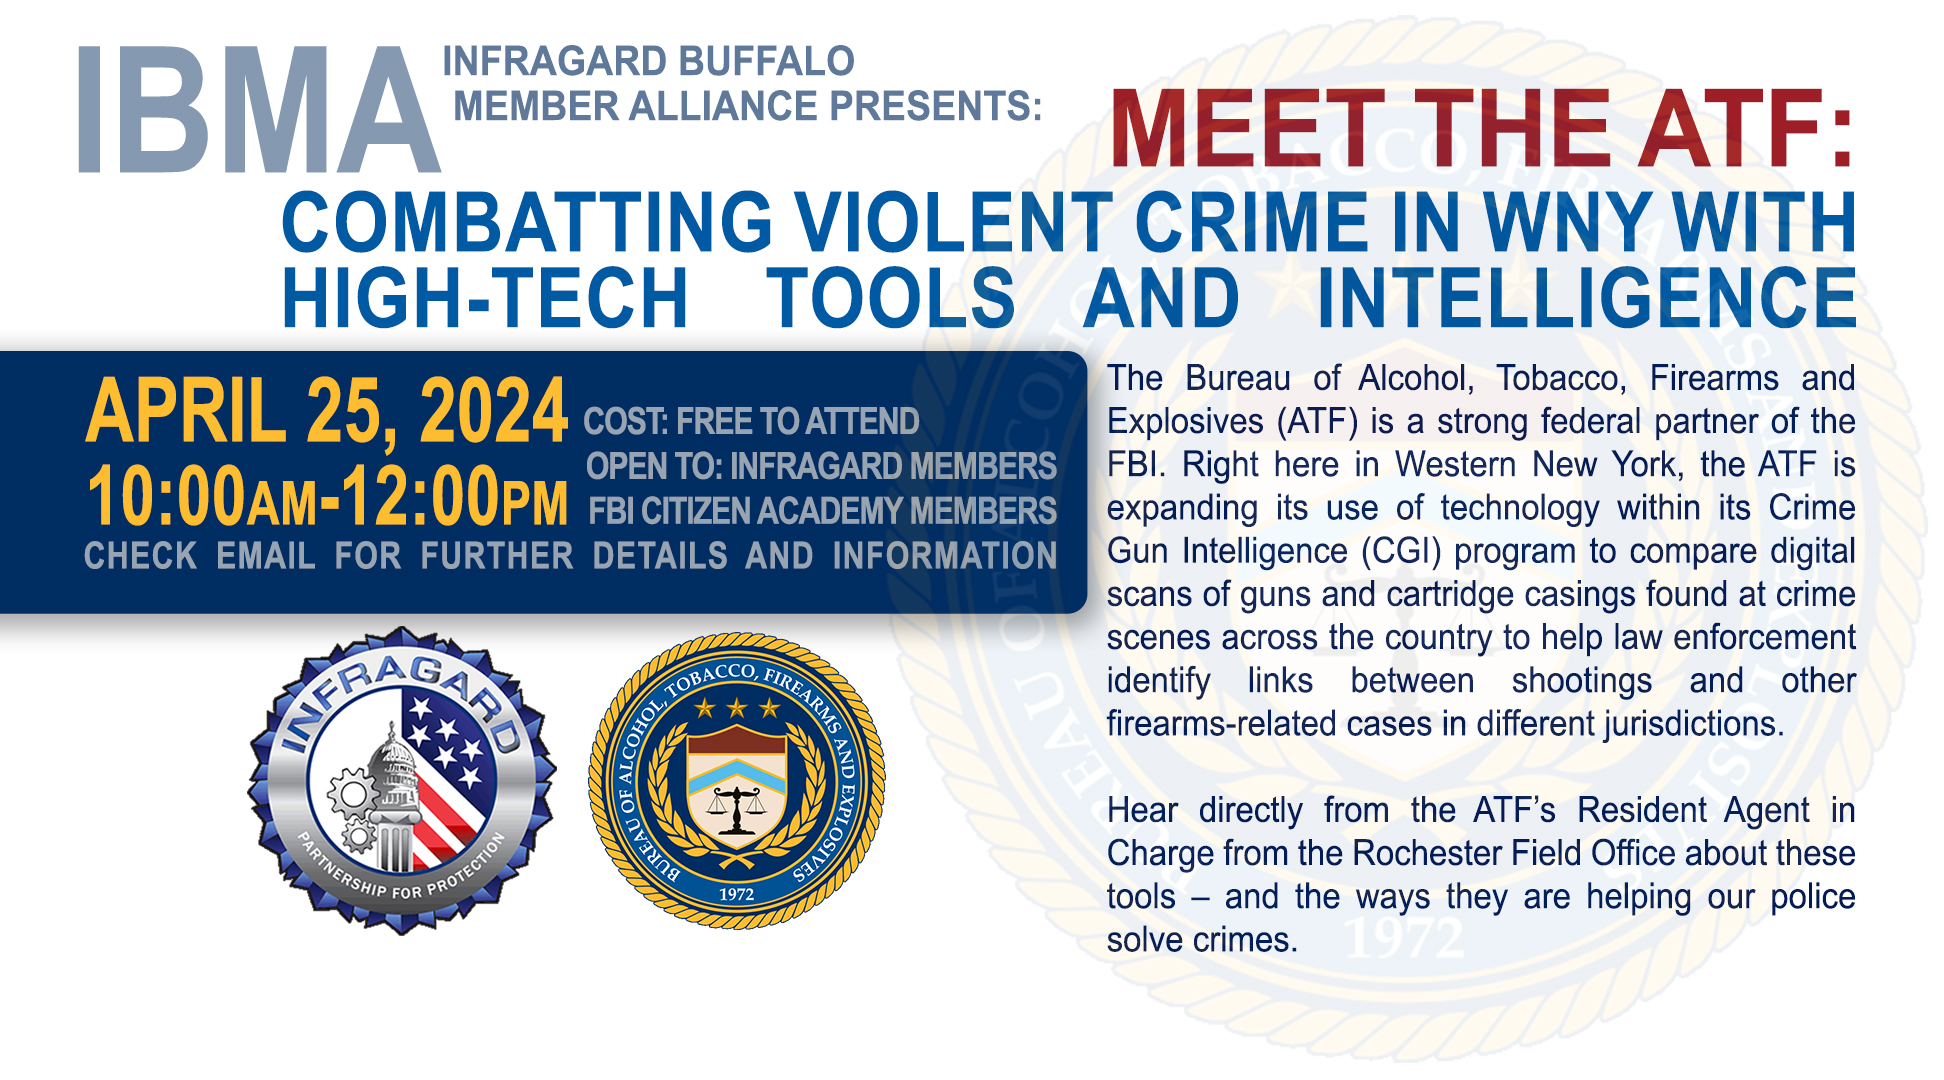 MEET THE ATF - Check Email for Details